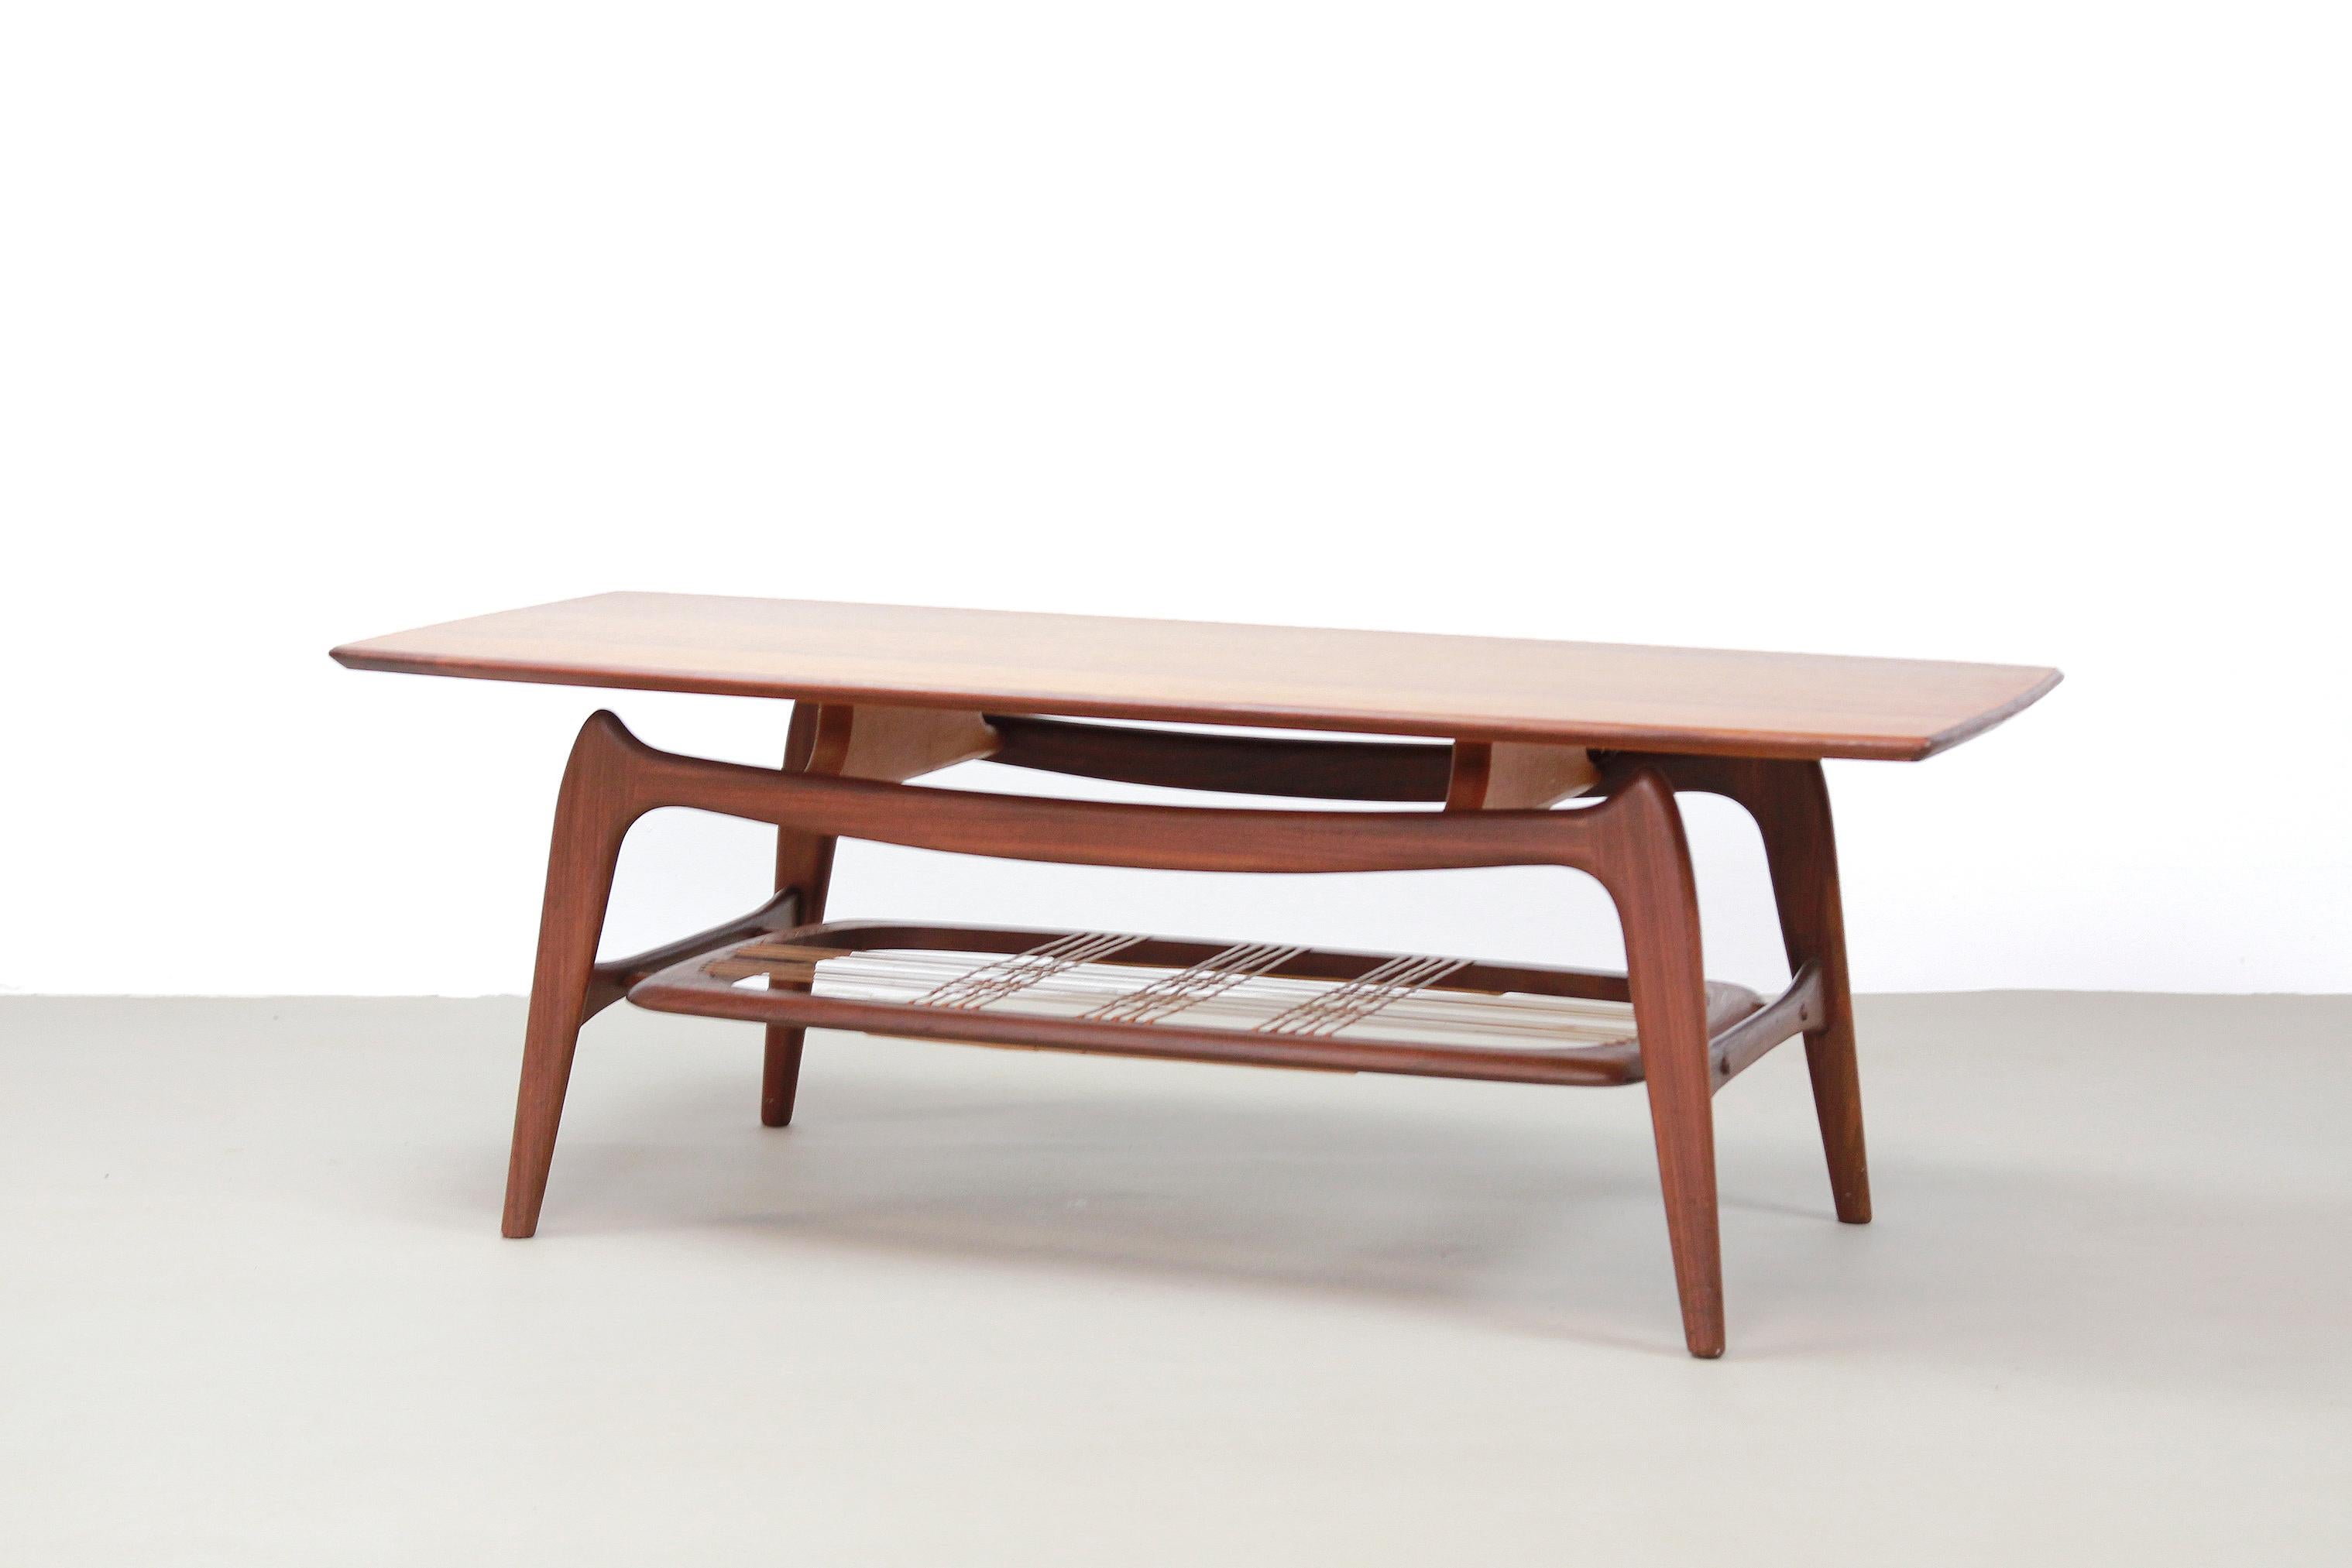 Beautiful organically designed coffee table by Louis van Teeffelen for WeBe. Made from solid teak 'insect legs' frame and teak veneered table top. Below the table top there is a webbing of rattan for, for example, magazines. The table is 42.5 cm